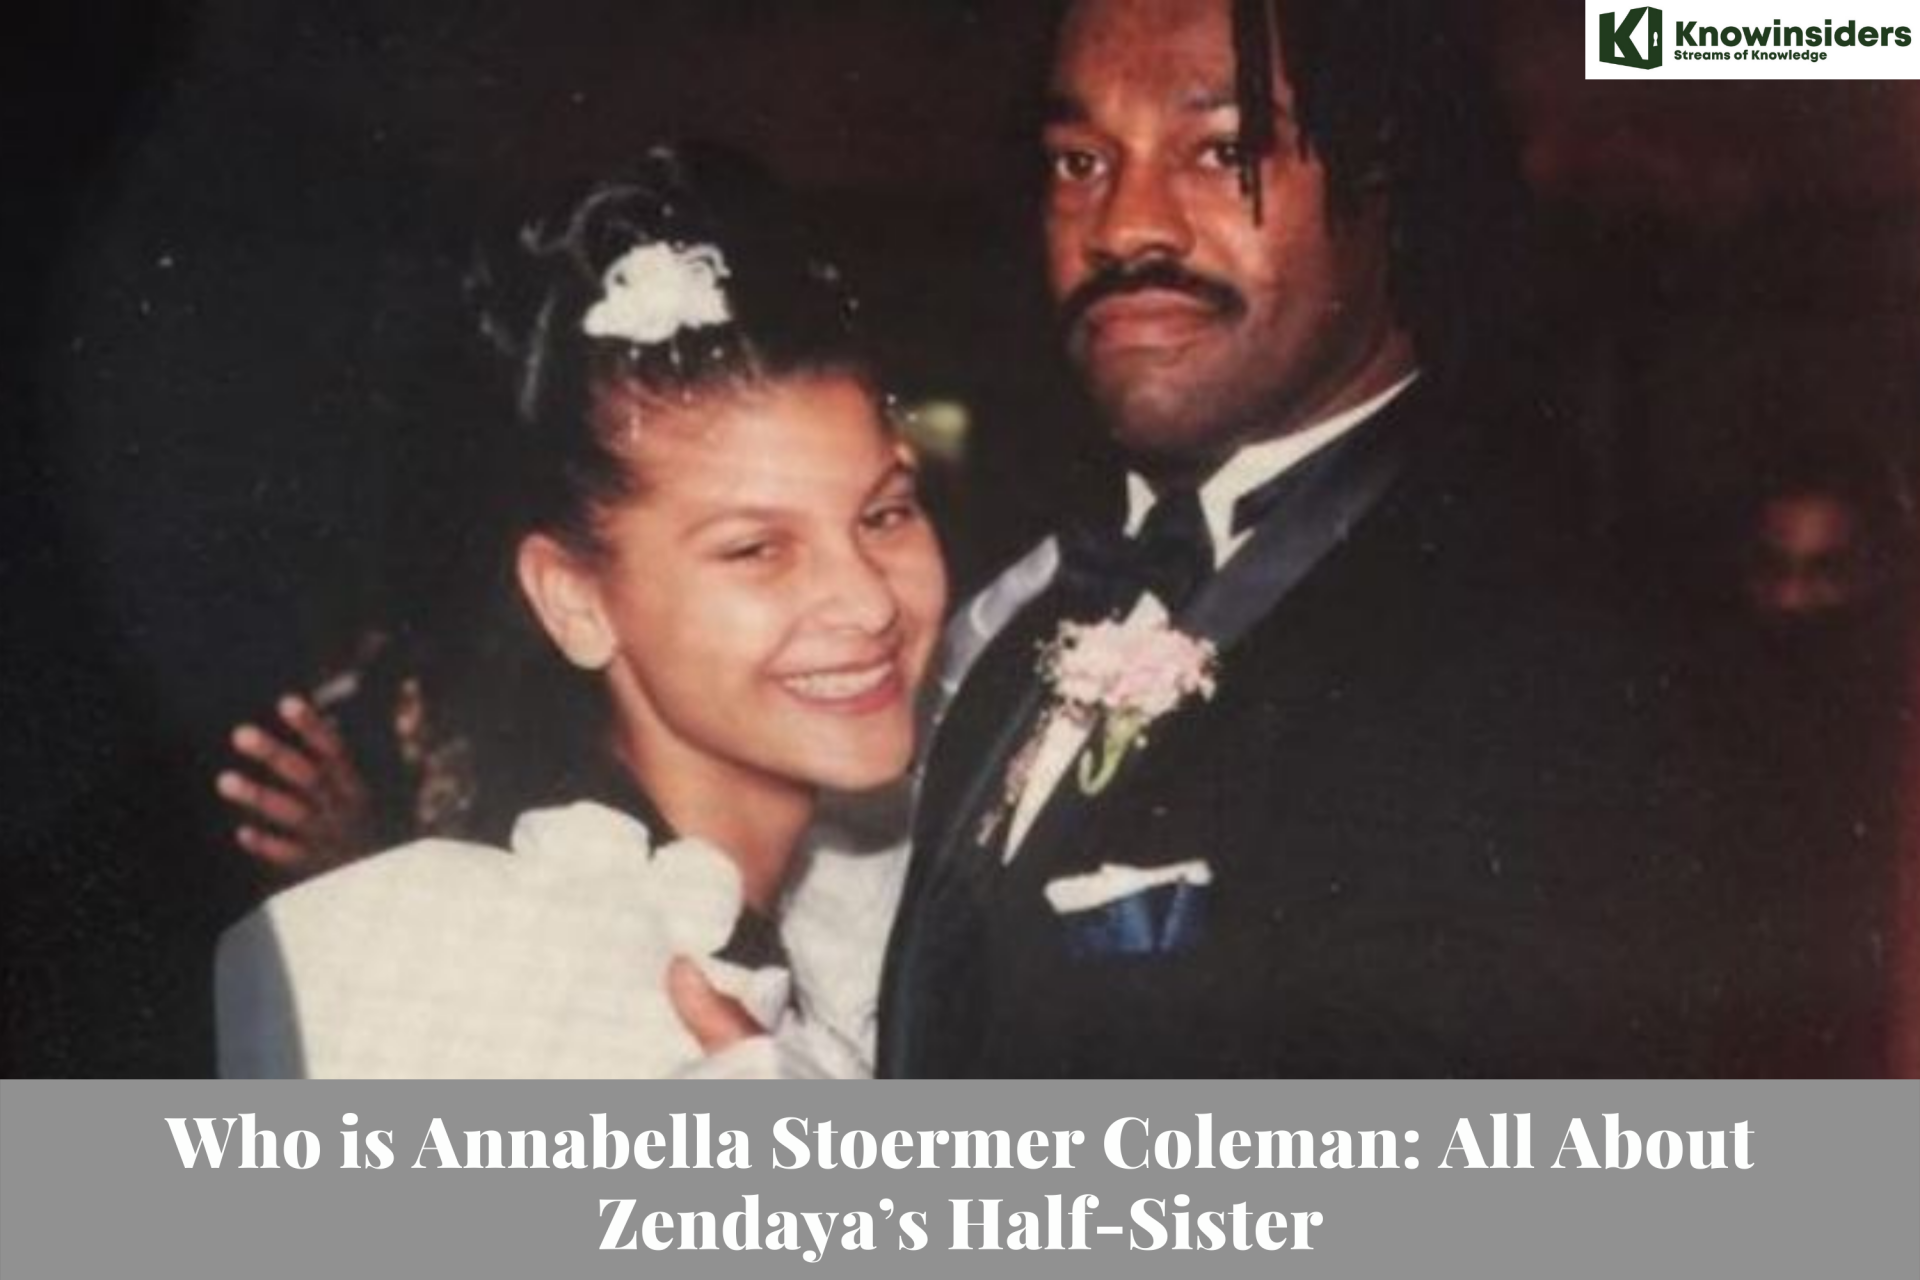 Who is Annabella Stoermer Coleman: All About Zendaya’s Half-Sister